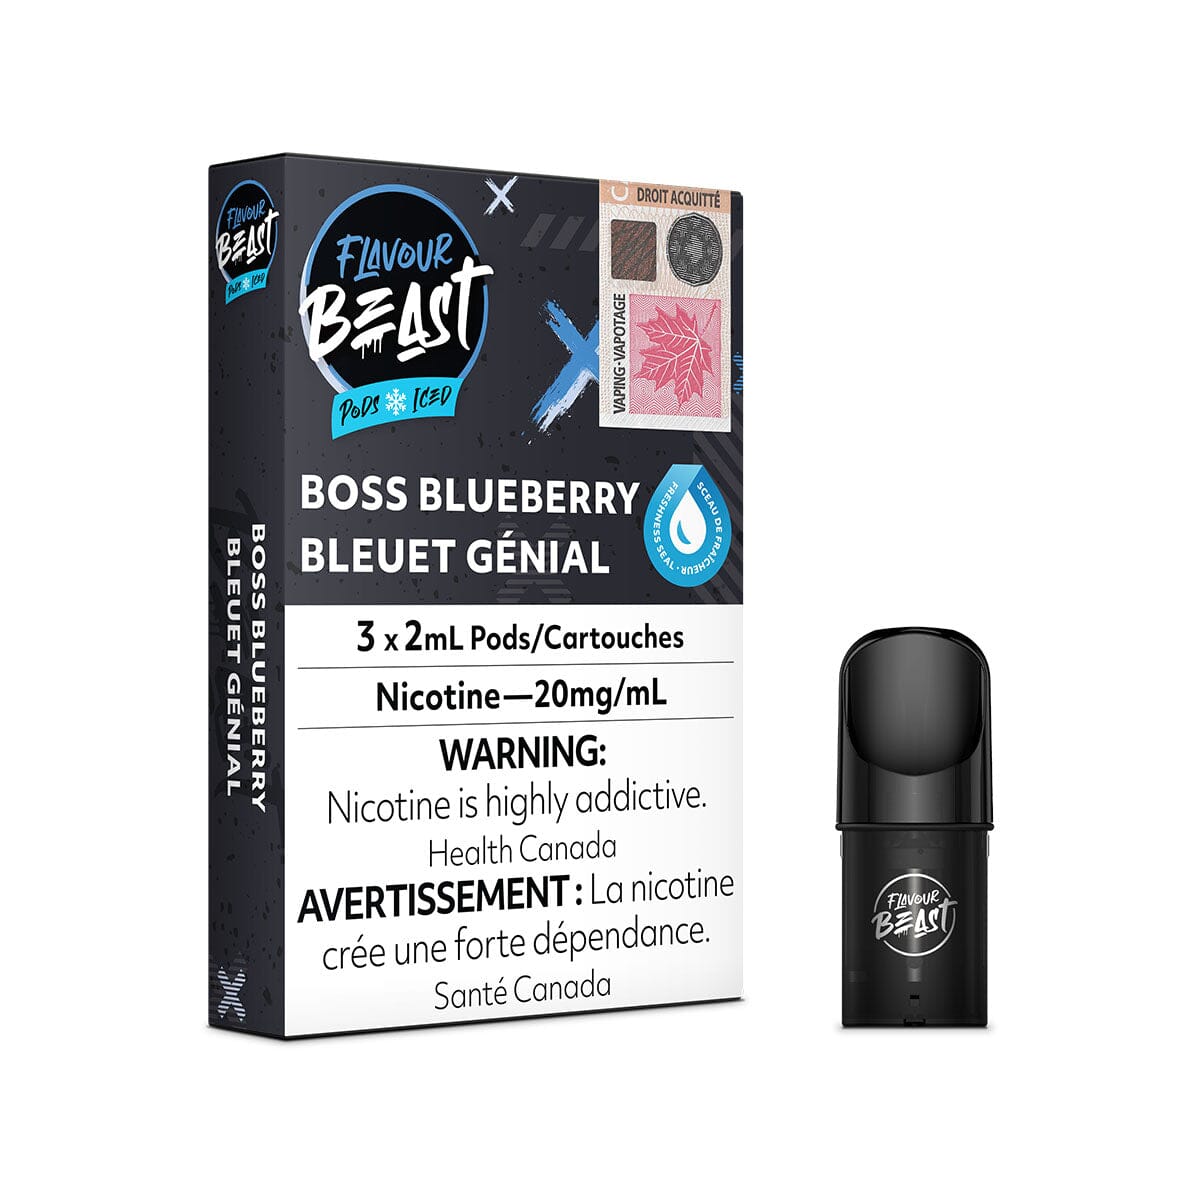 STLTH Compatible Flavour Beast Boss Bluueberry Iced Vape Pods Pre-filled Pod Flavour Beast 